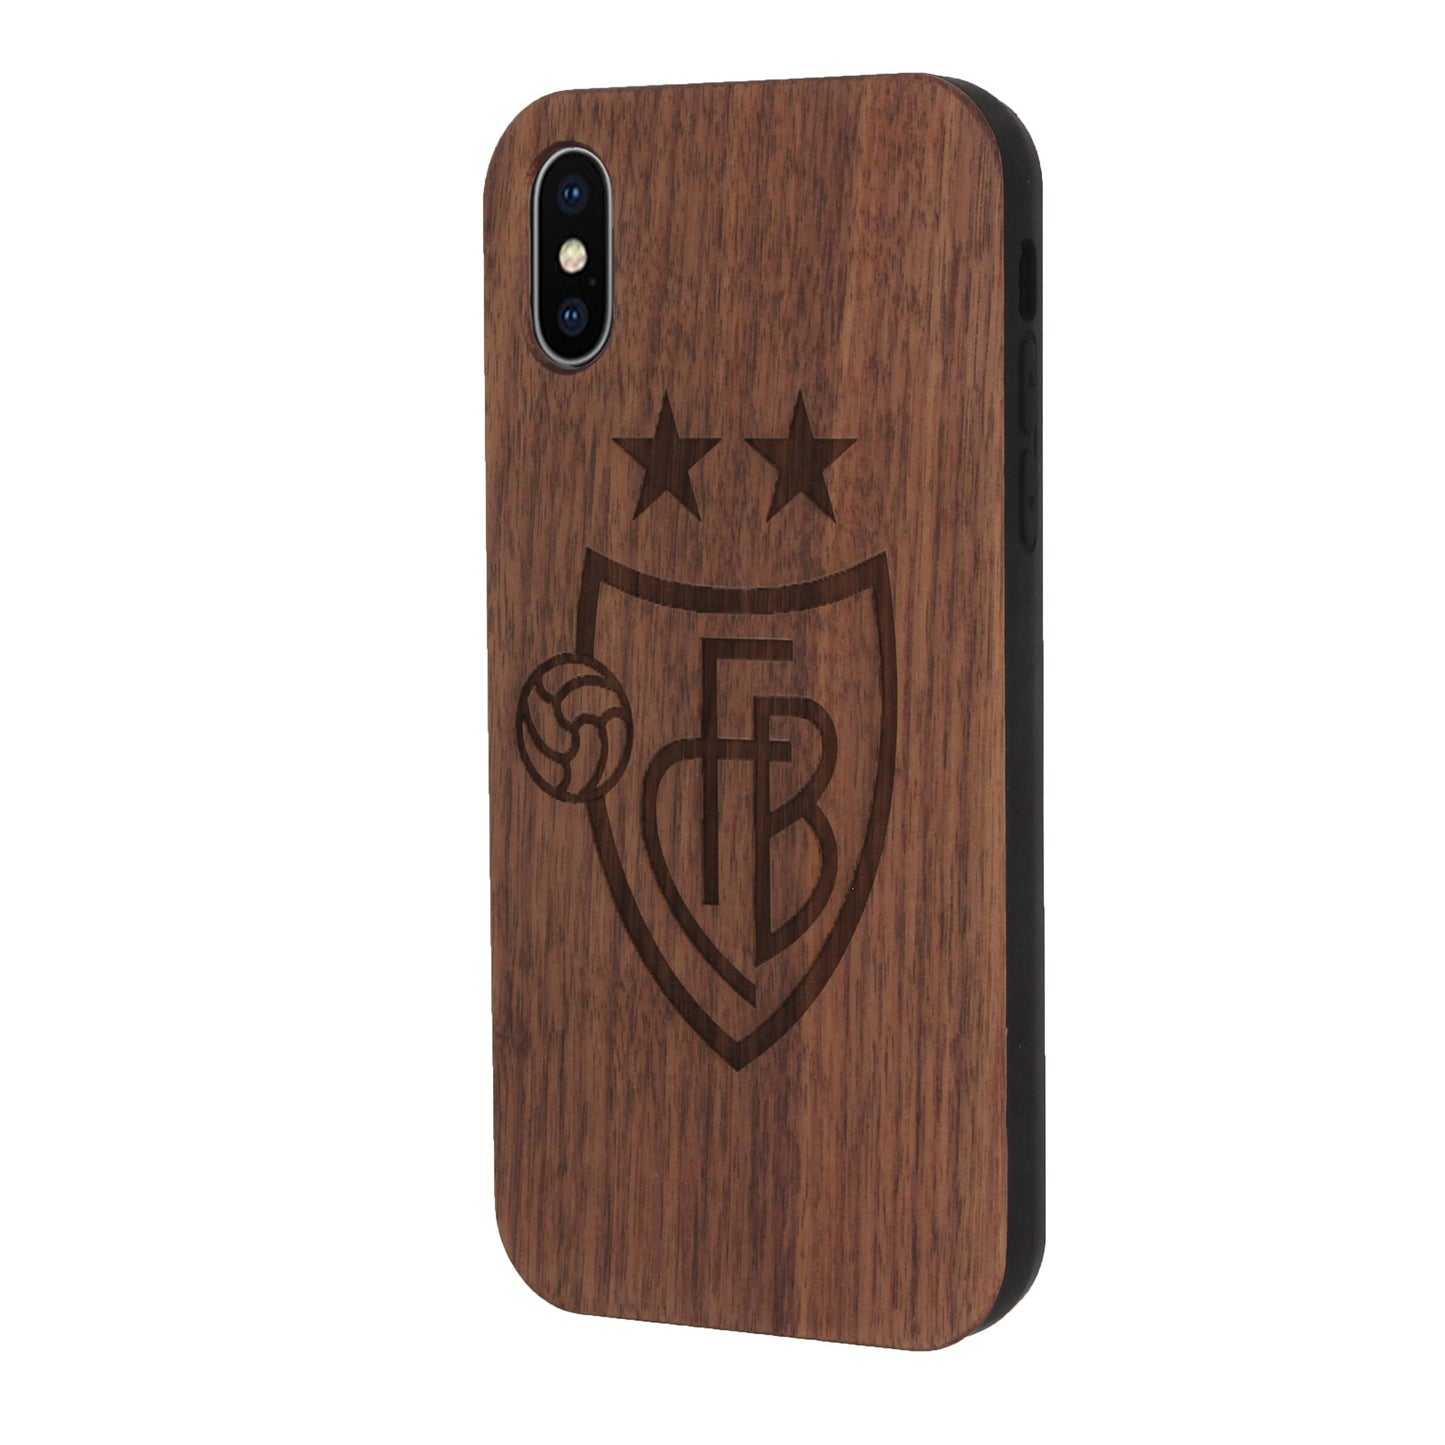 FCB Eden case made of walnut wood for iPhone X/XS